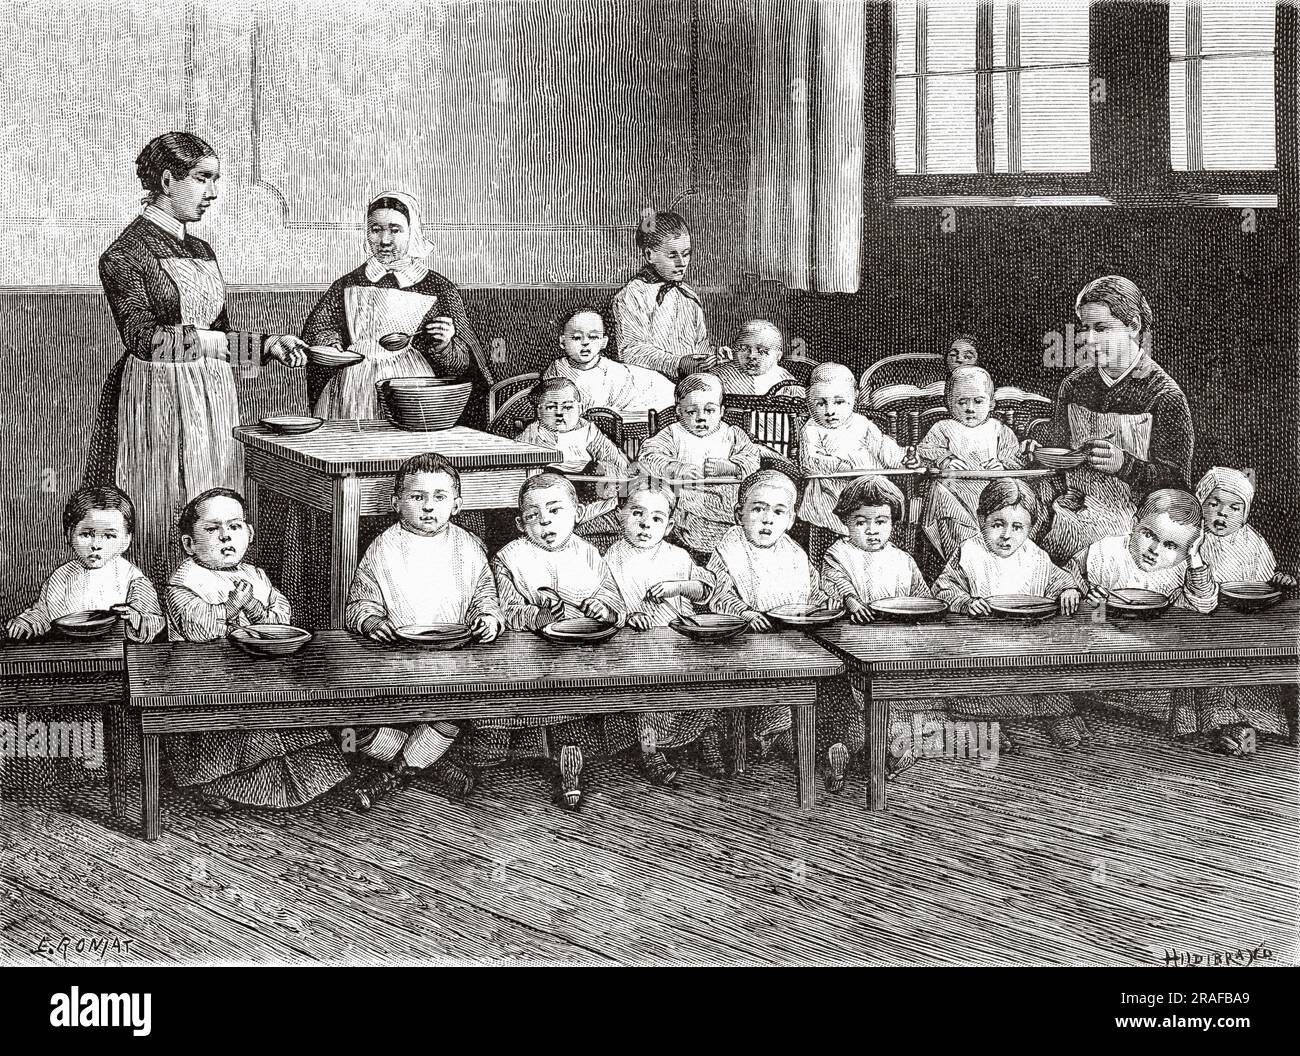 Little children eating in the nursery, Munster, Alsace, Haut-Rhin. France, Europe. Across Alsace and Lorraine by Charles Grad 1884. Old 19th century engraving from Le Tour du Monde 1906 Stock Photo